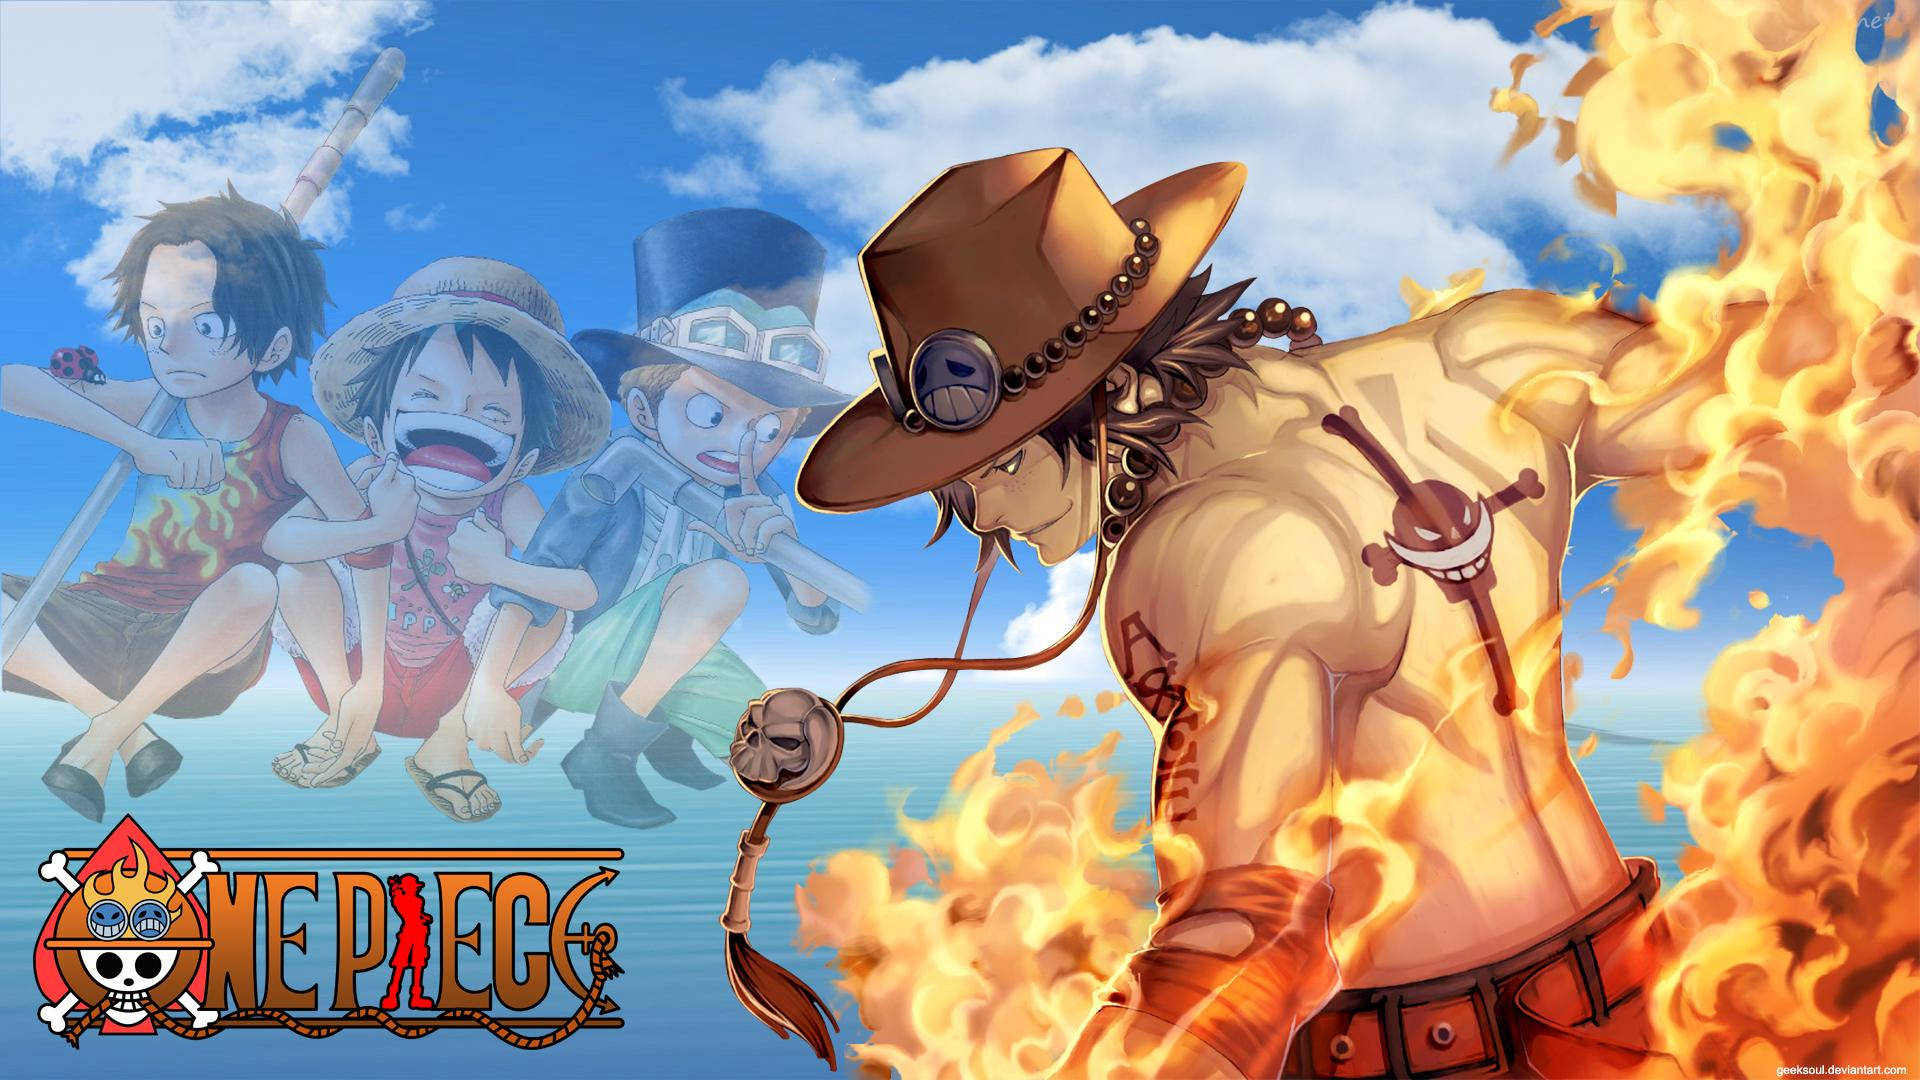 Free One Piece Ace Wallpaper Downloads, [100+] One Piece Ace Wallpapers for  FREE 